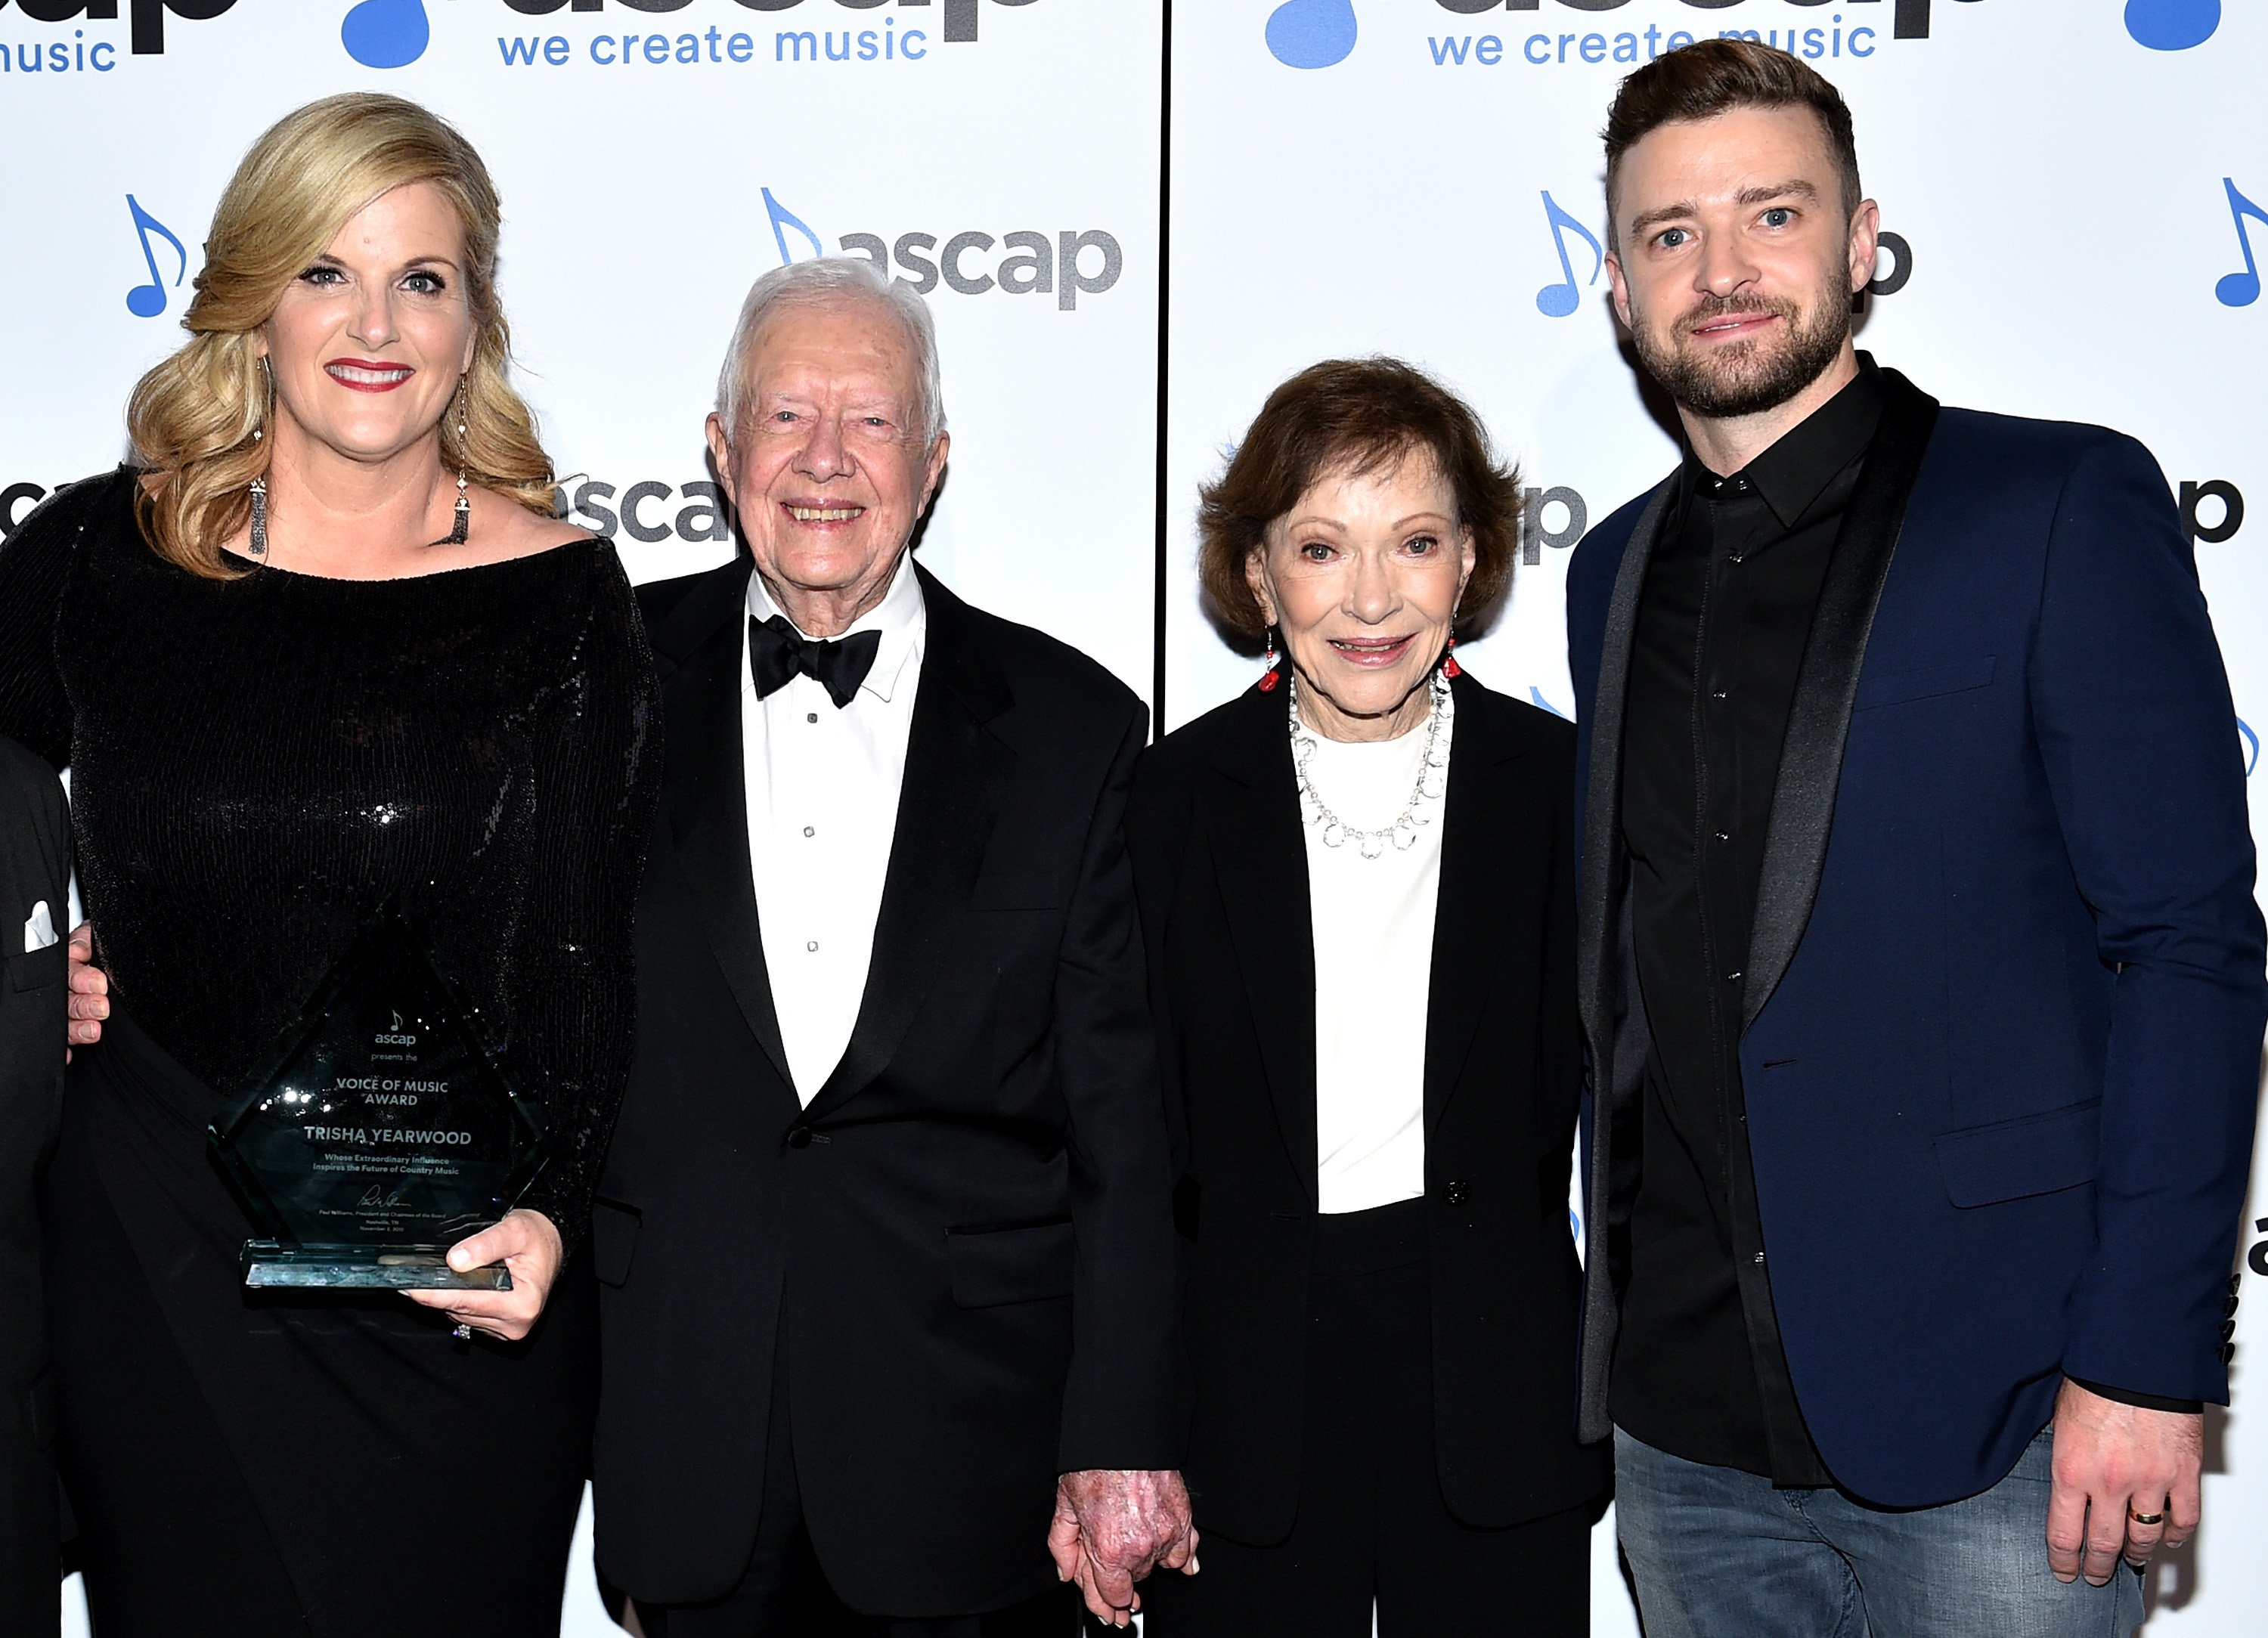 Trisha Yearwood, Former President Jimmy Carter, Rosalynn Carter, and Justin Timberlake on November 2, 2015 in Nashville, Tennessee. | Source: Getty Images